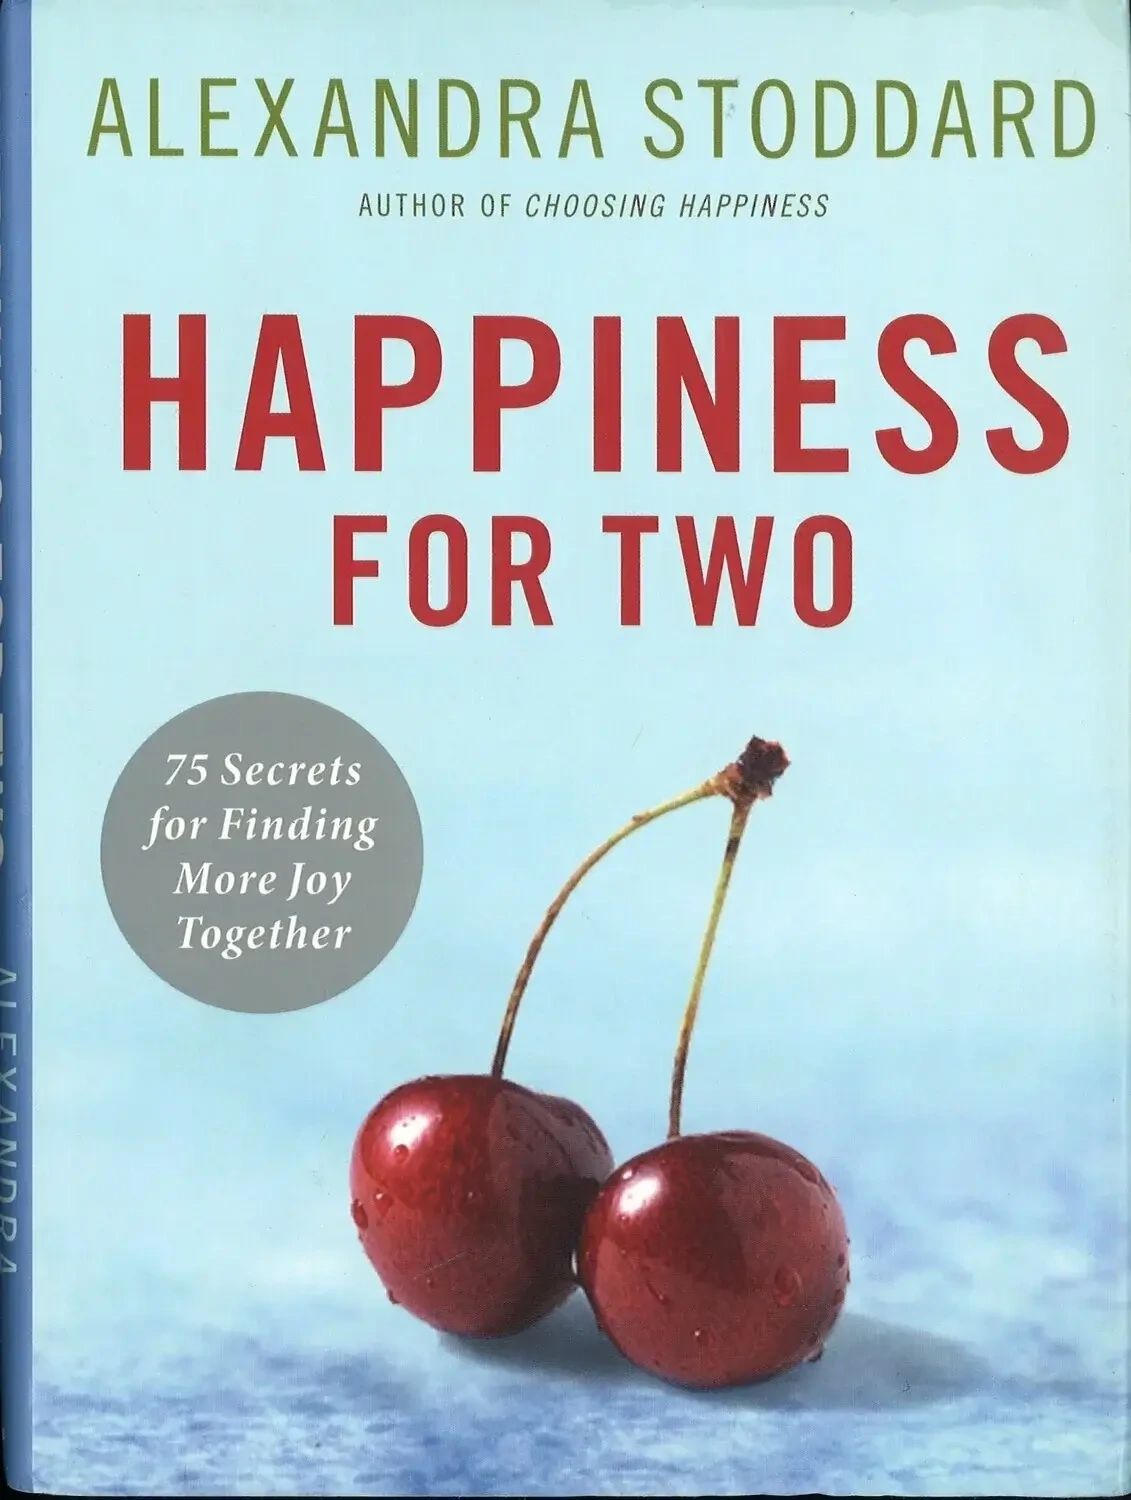 Happiness for Two by Alexandra Stoddard